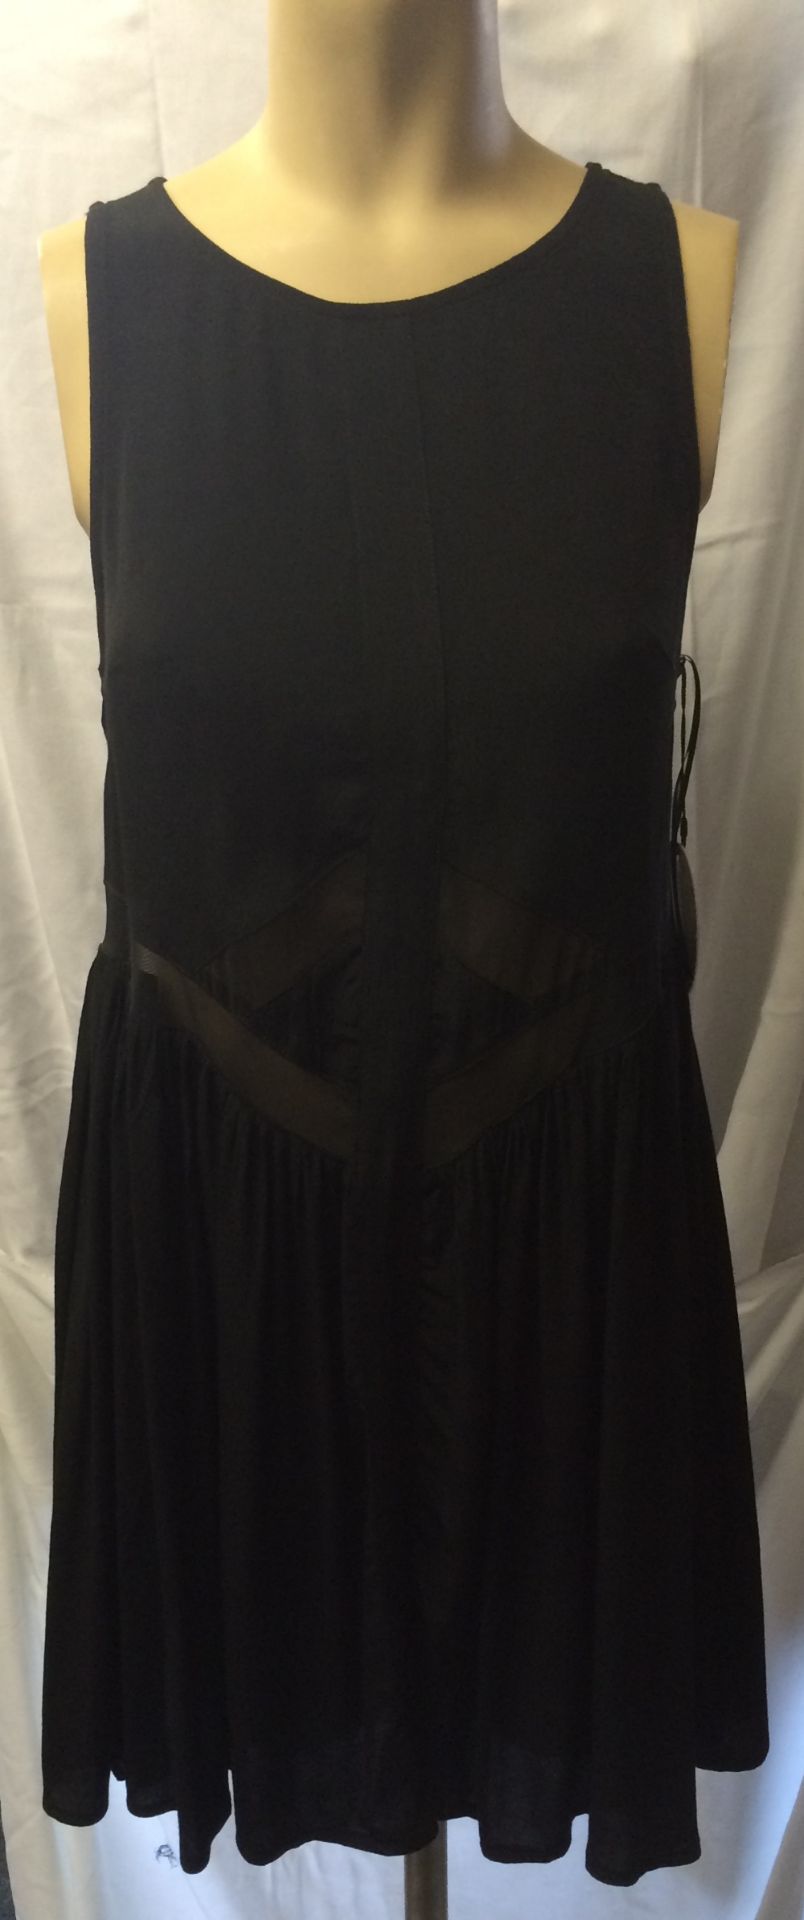 NEW EX DISPLAY KISS THE SKY HOLD ME CLOSE BLACK EXTRA SMALL DRESS